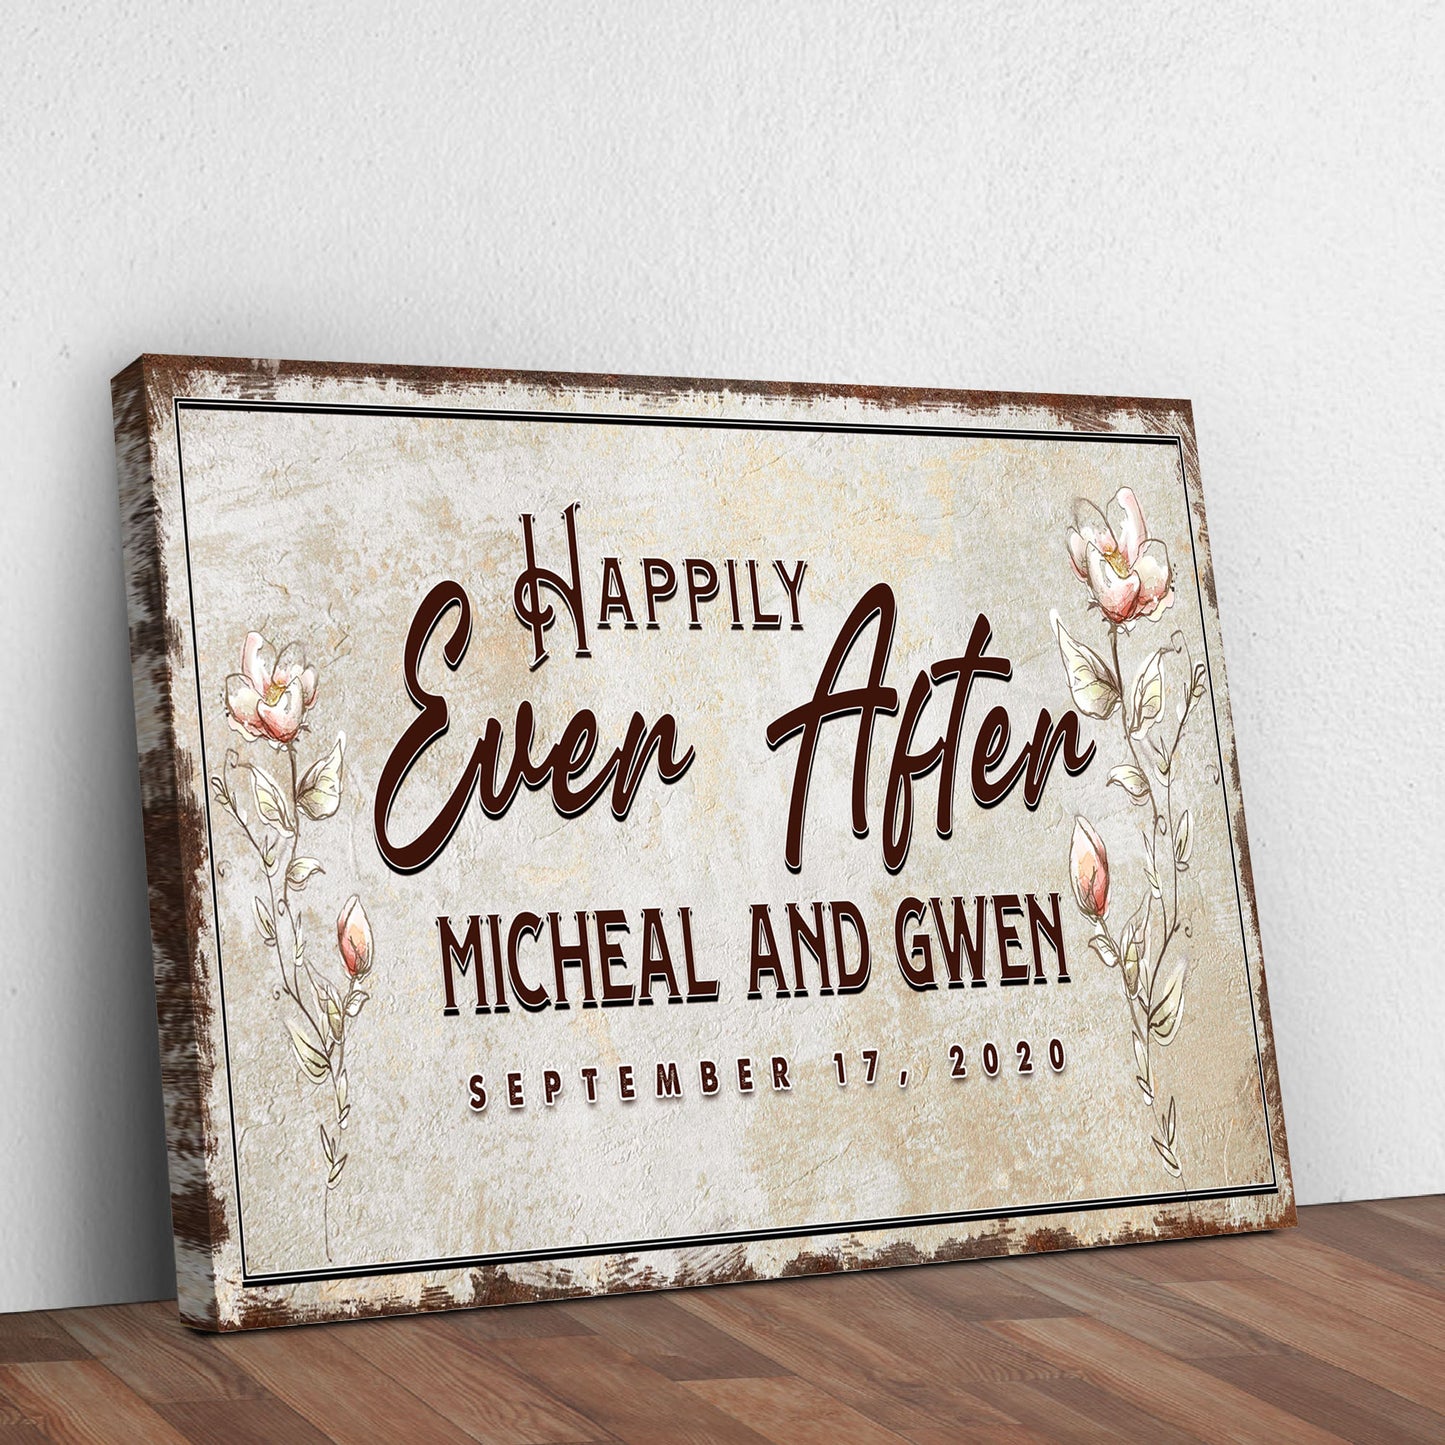 Happily Ever After Couple Sign II - Image by Tailored Canvases